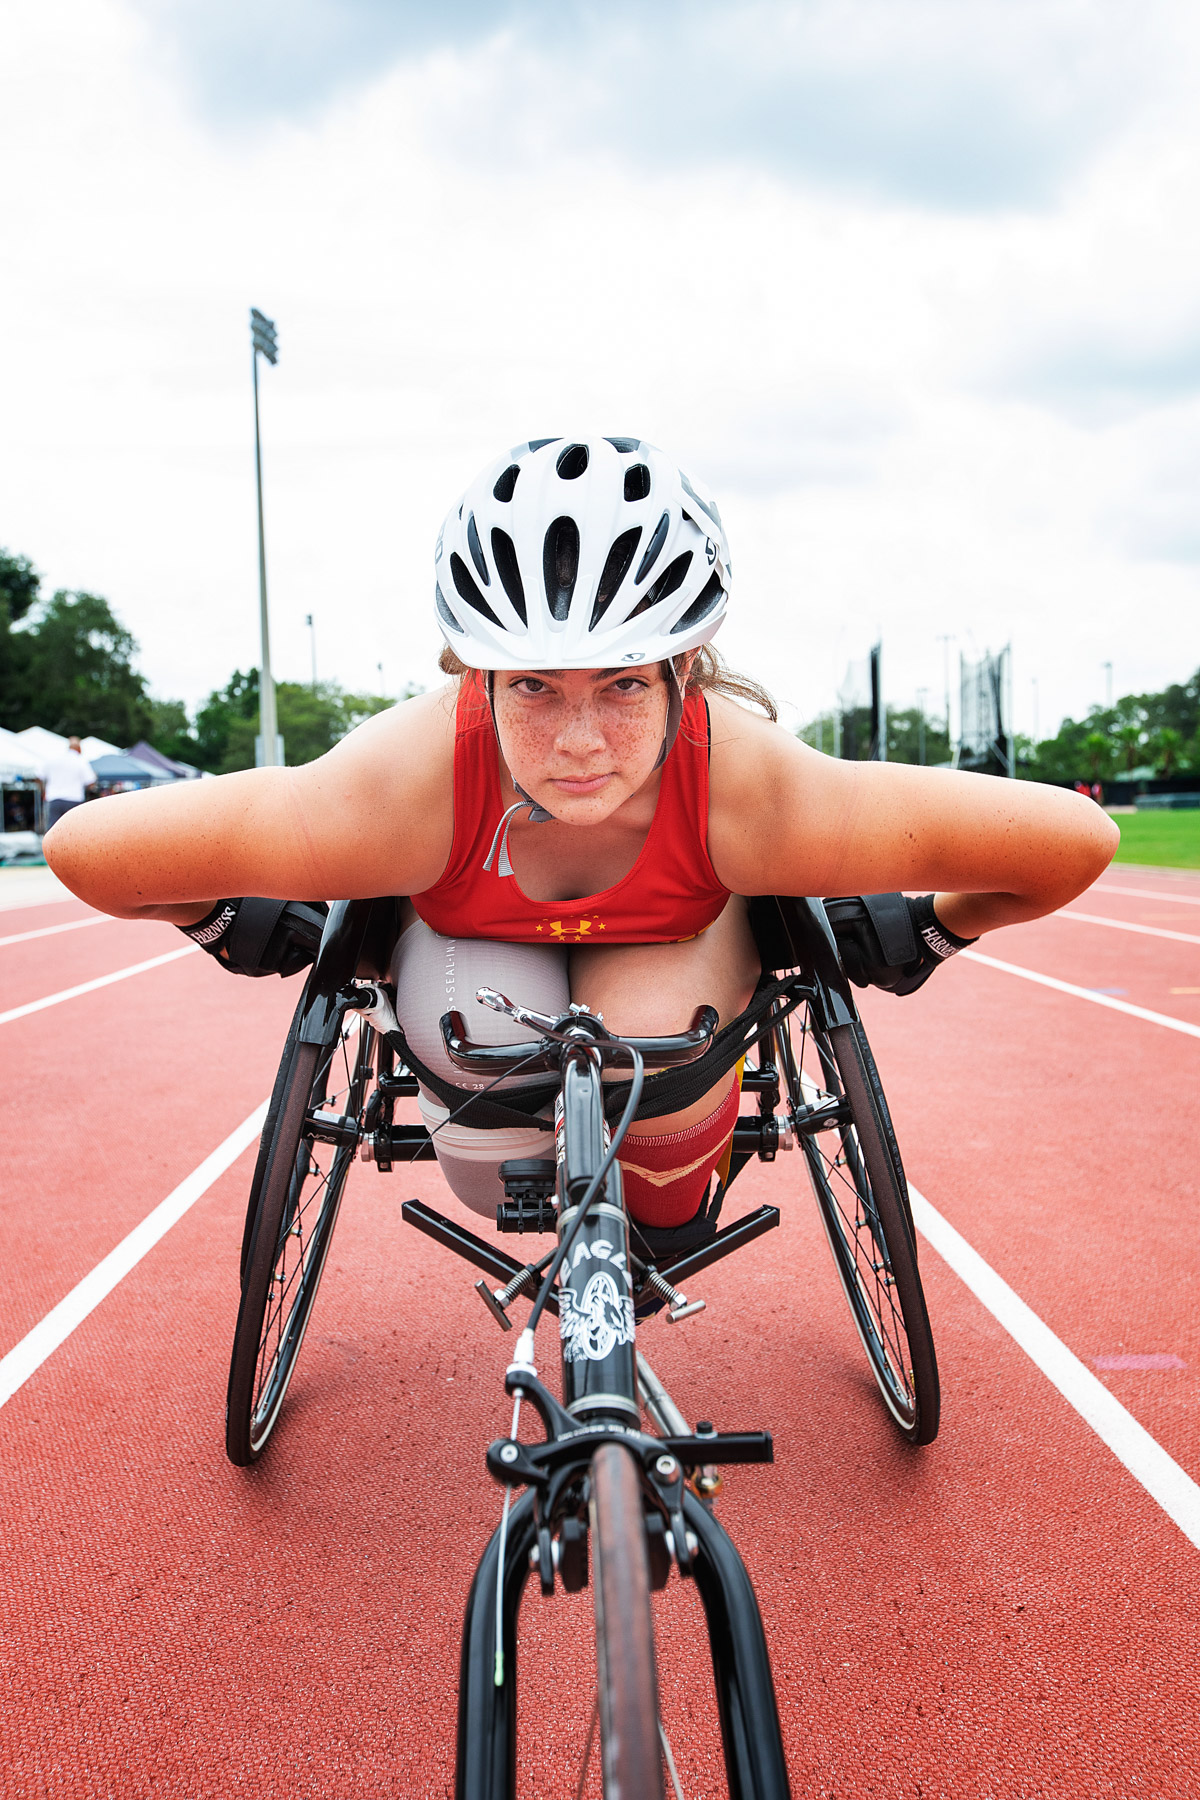 Under Armour Warrior Games by Boston based commercial lifestyle photographer Brian Nevins